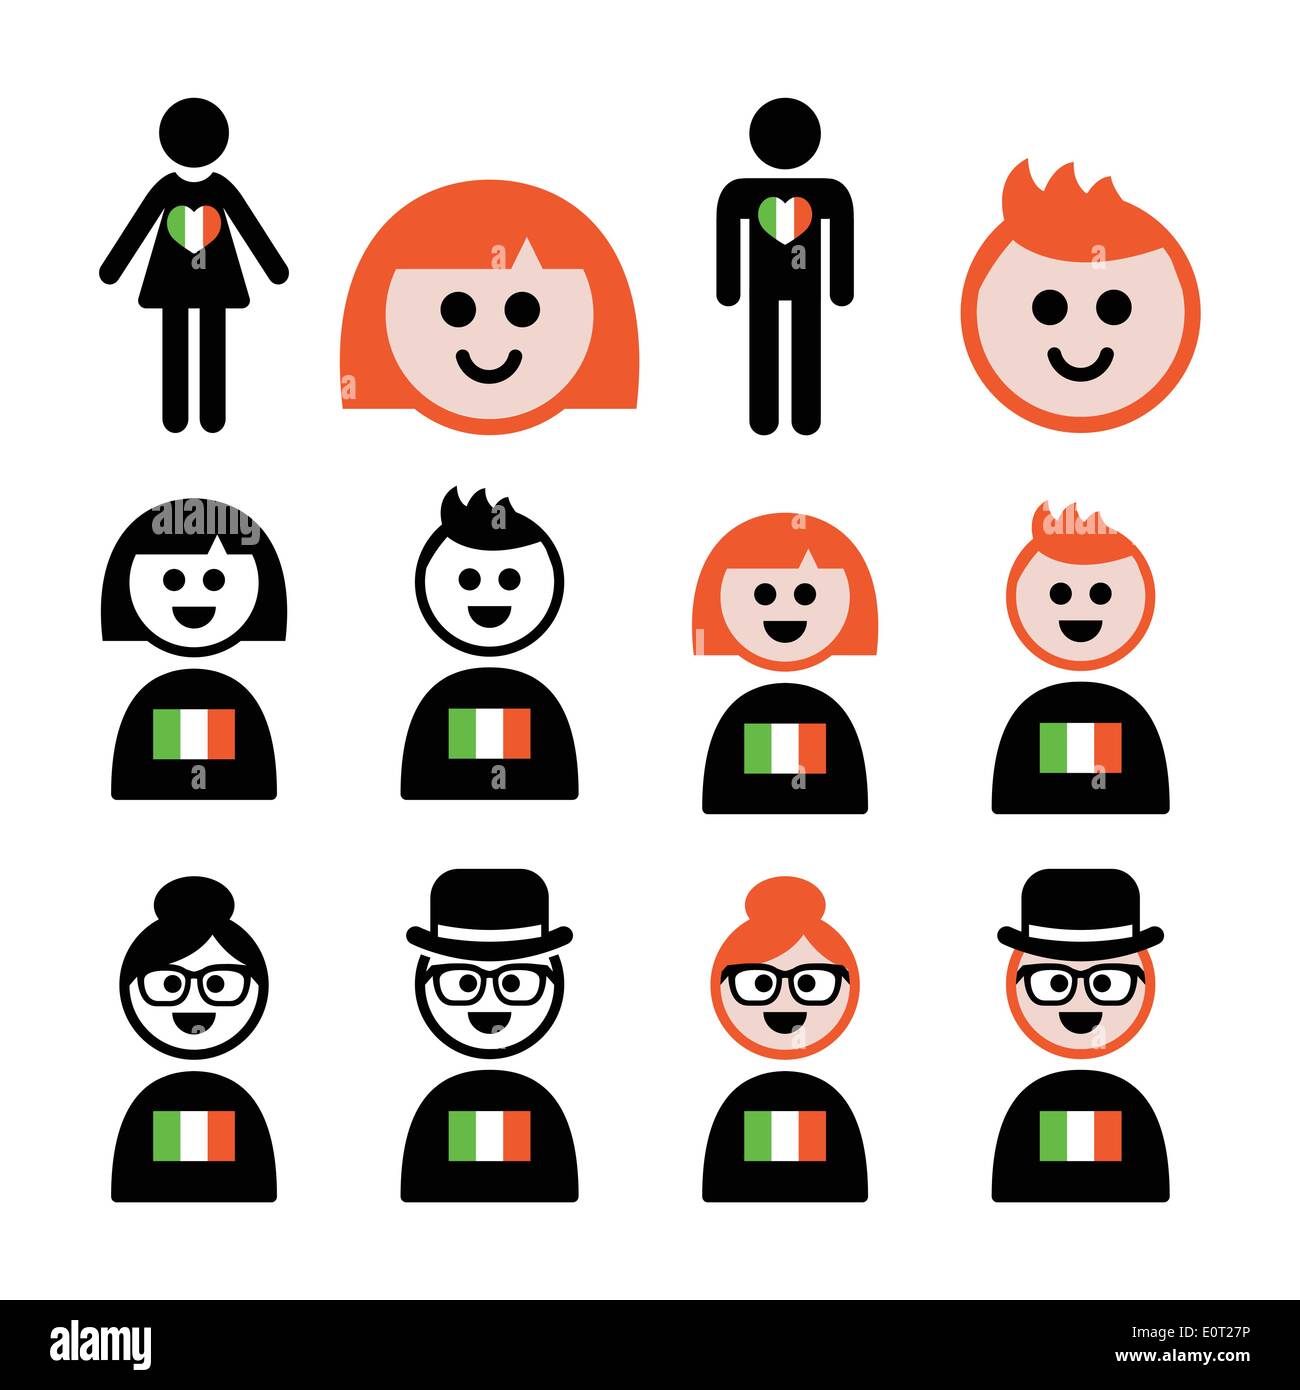 St Patricks Day, irish poeple with flags and ginger hair icon Stock Vector